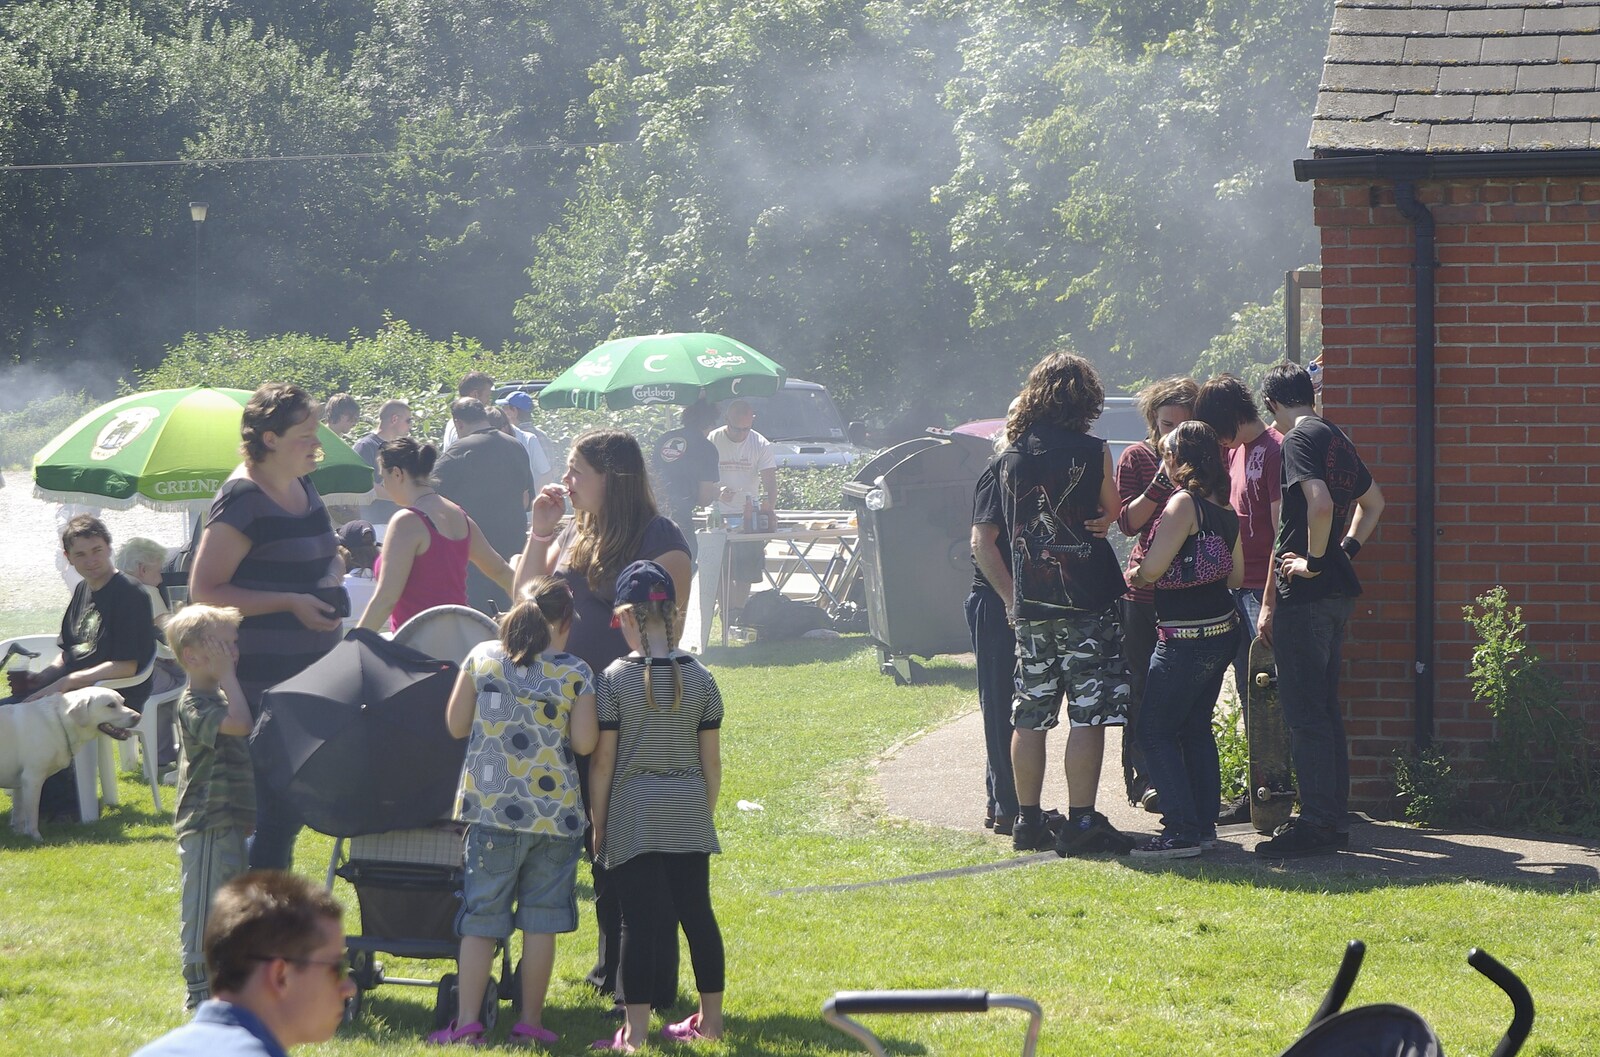 The Opening of Eye Skateboard Park, and The BBs at Cotton, Suffolk - 5th August 2007: Barbeque smoke drifts over the Town Moors